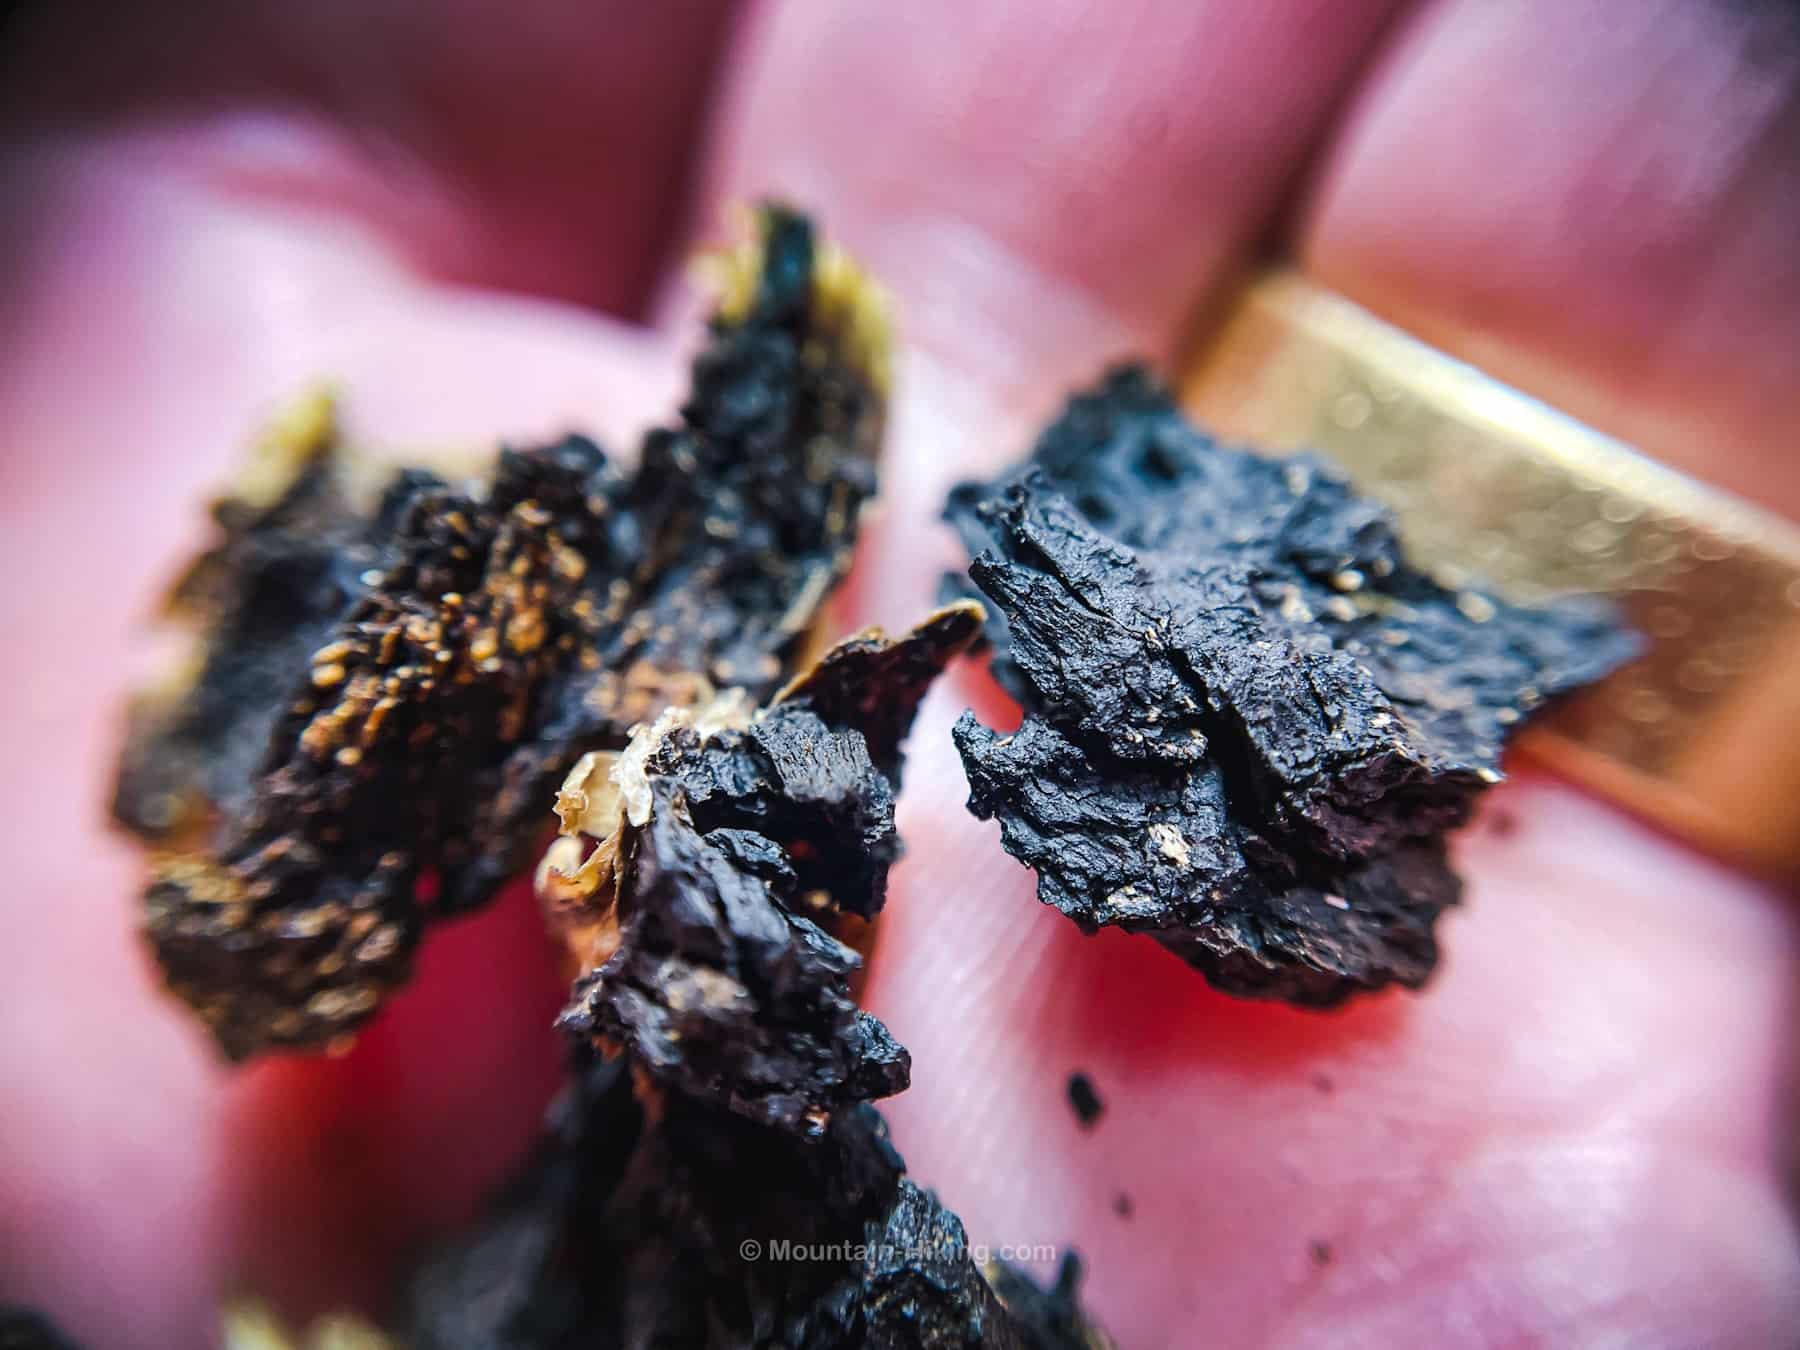 chaga conk pieces in human hand